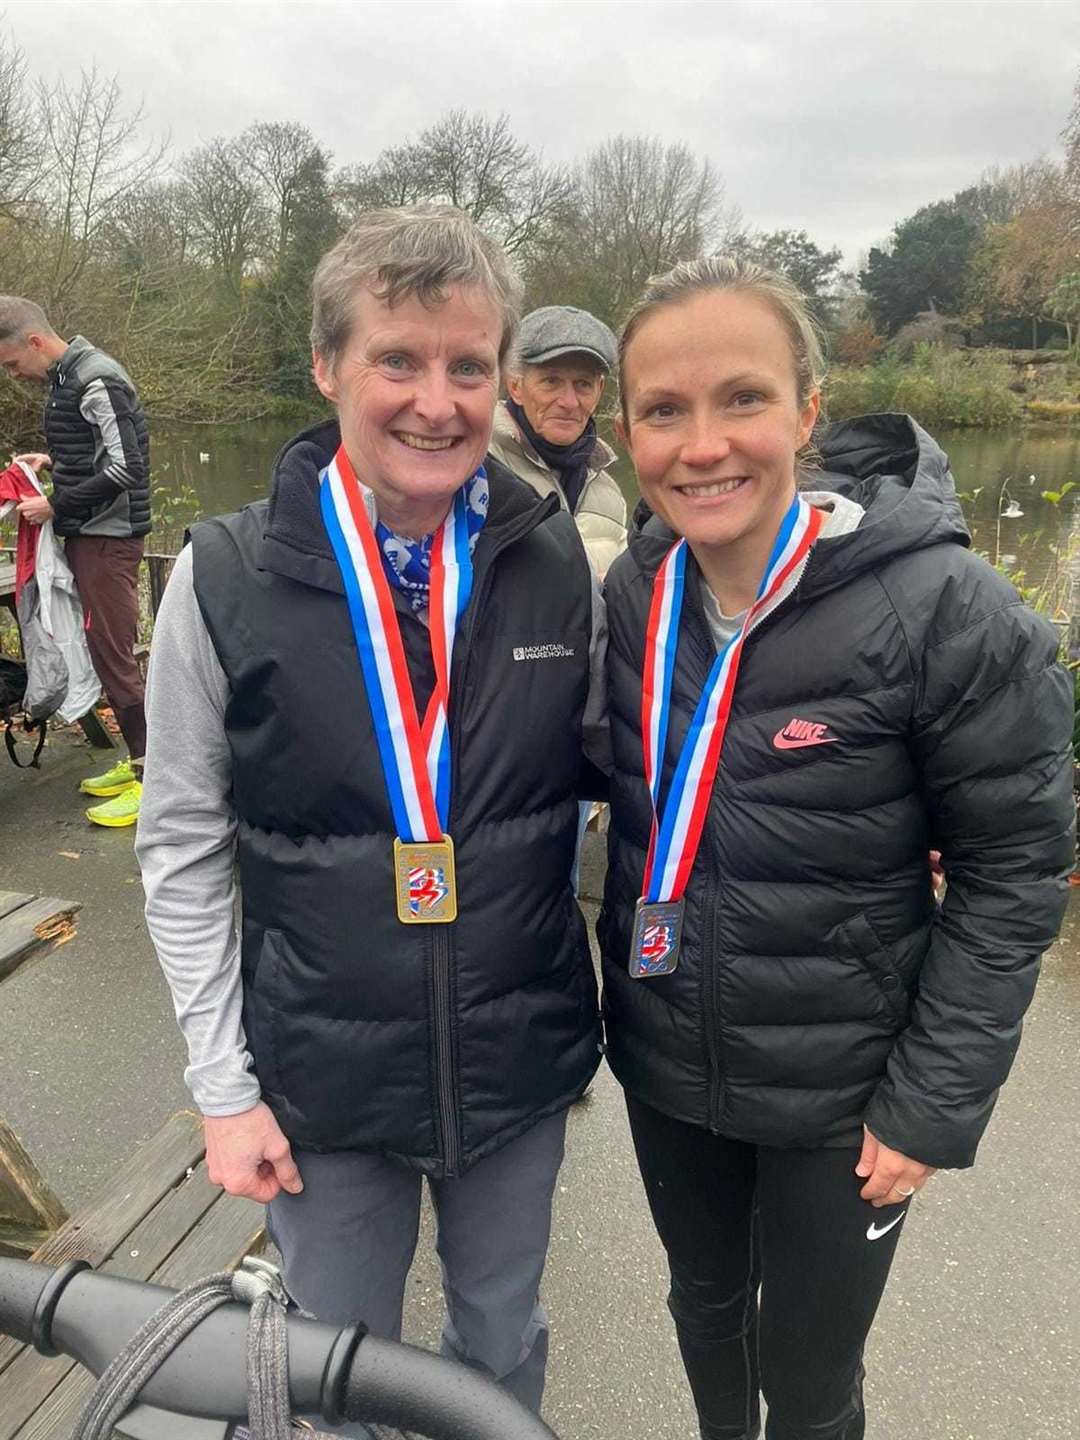 Julie Wilson and Jenny Bannerman each won medals at the British Seniors 5k Championship.